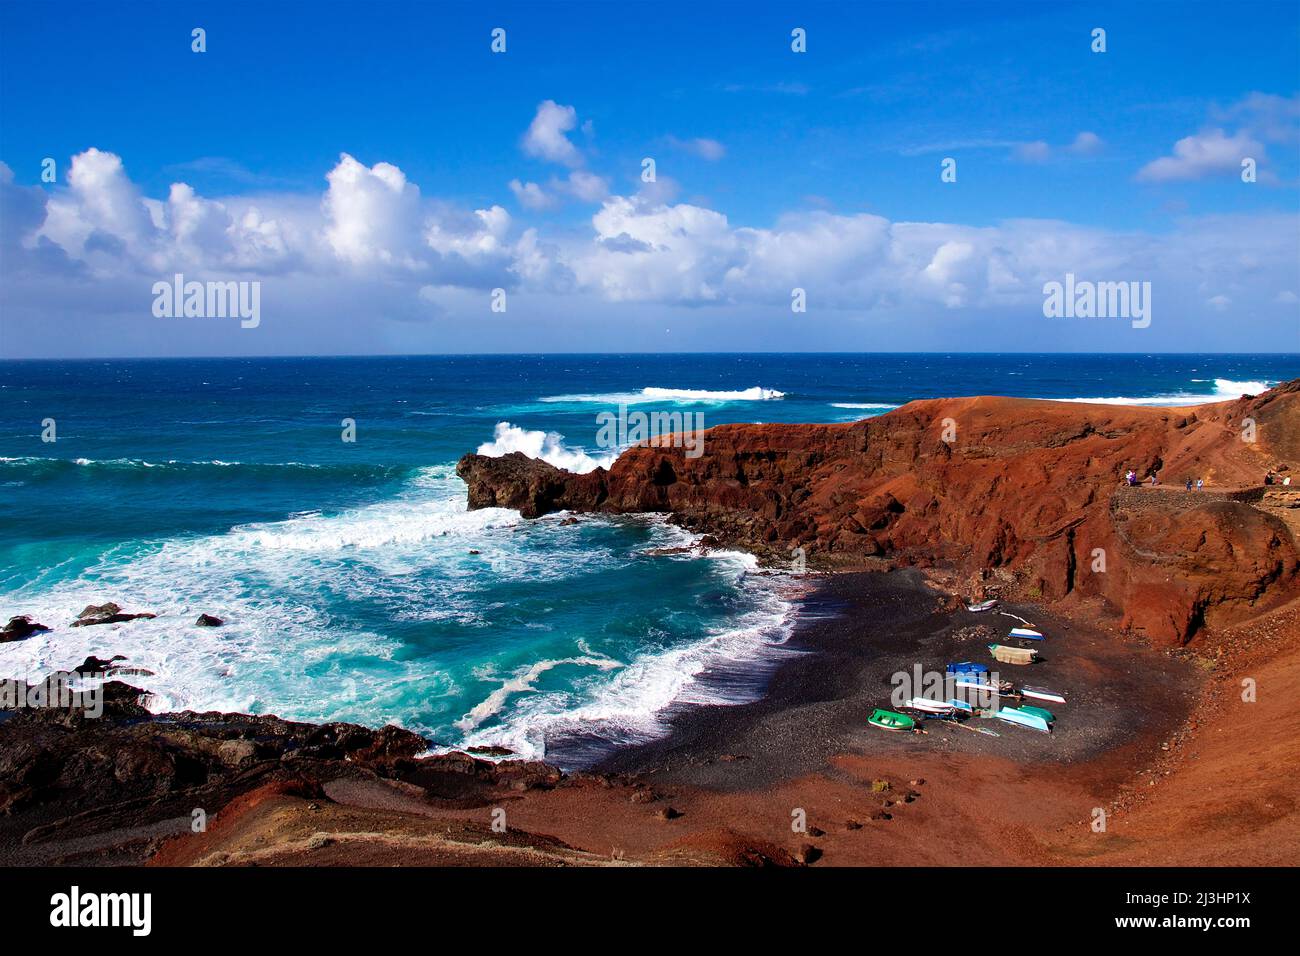 Canary Islands, Lanzarote, volcanic island, west coast, crater lake, Charco de los Clicos, lava rocks red, volcanic lake green, sky blue, clouds white, beach, parking, cars, surf, red lava bay Stock Photo